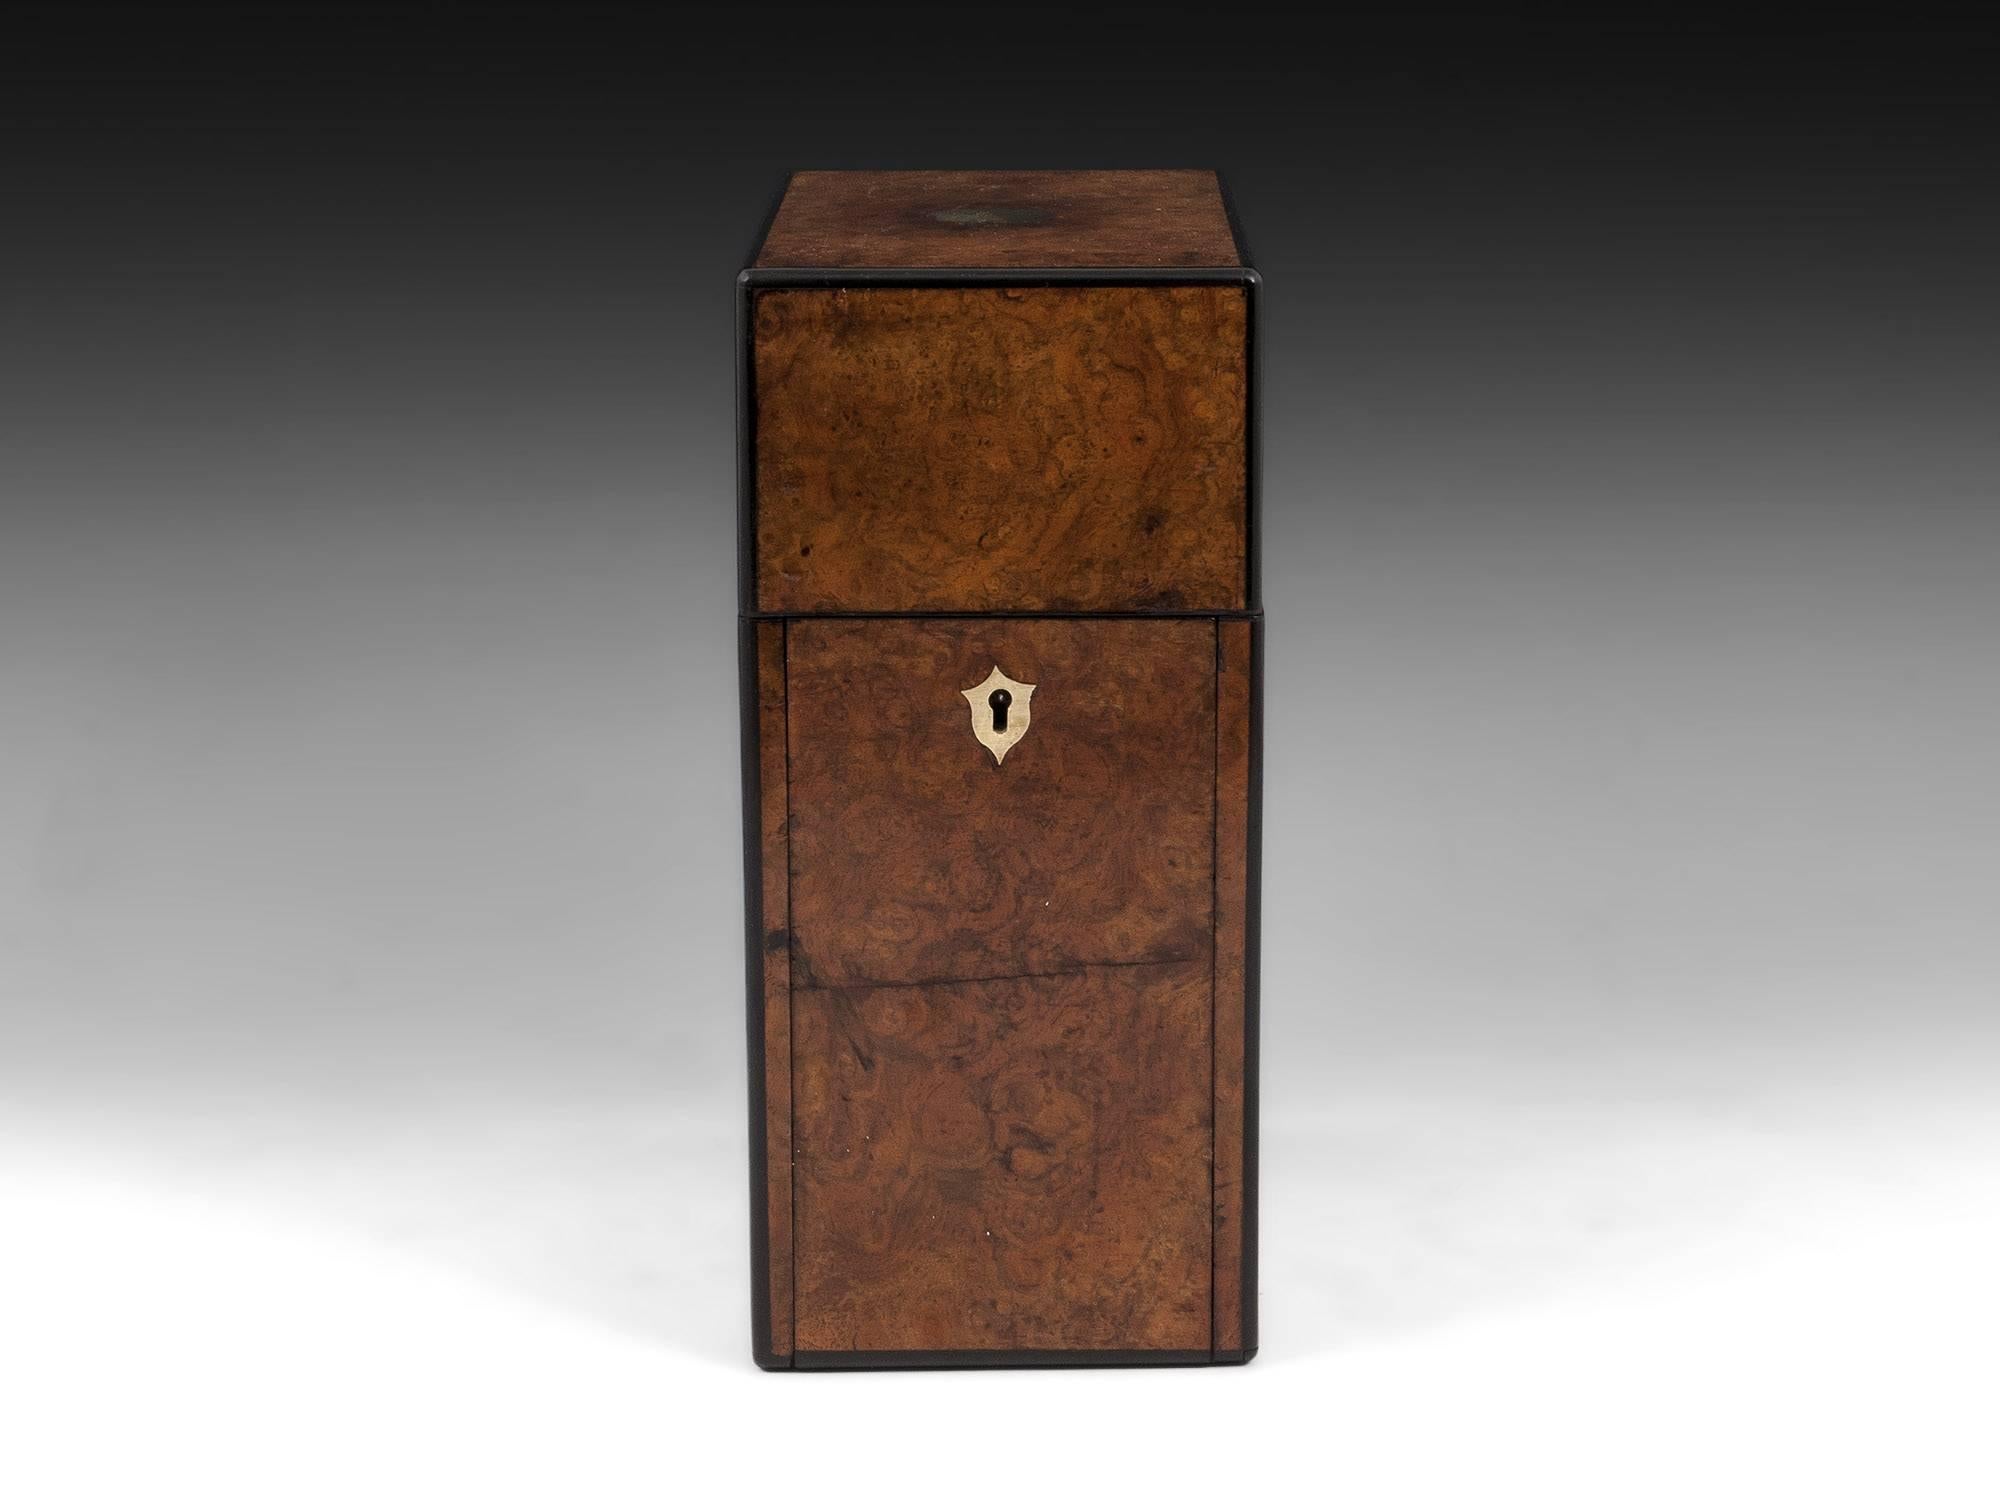 Antique burr walnut decanter box with ebony edging, vacant brass initial plate and brass escutcheon. 

Lifting the lid of the single decanter box allows the front of the box to fall forward revealing a single glass decanter with pouring spout and